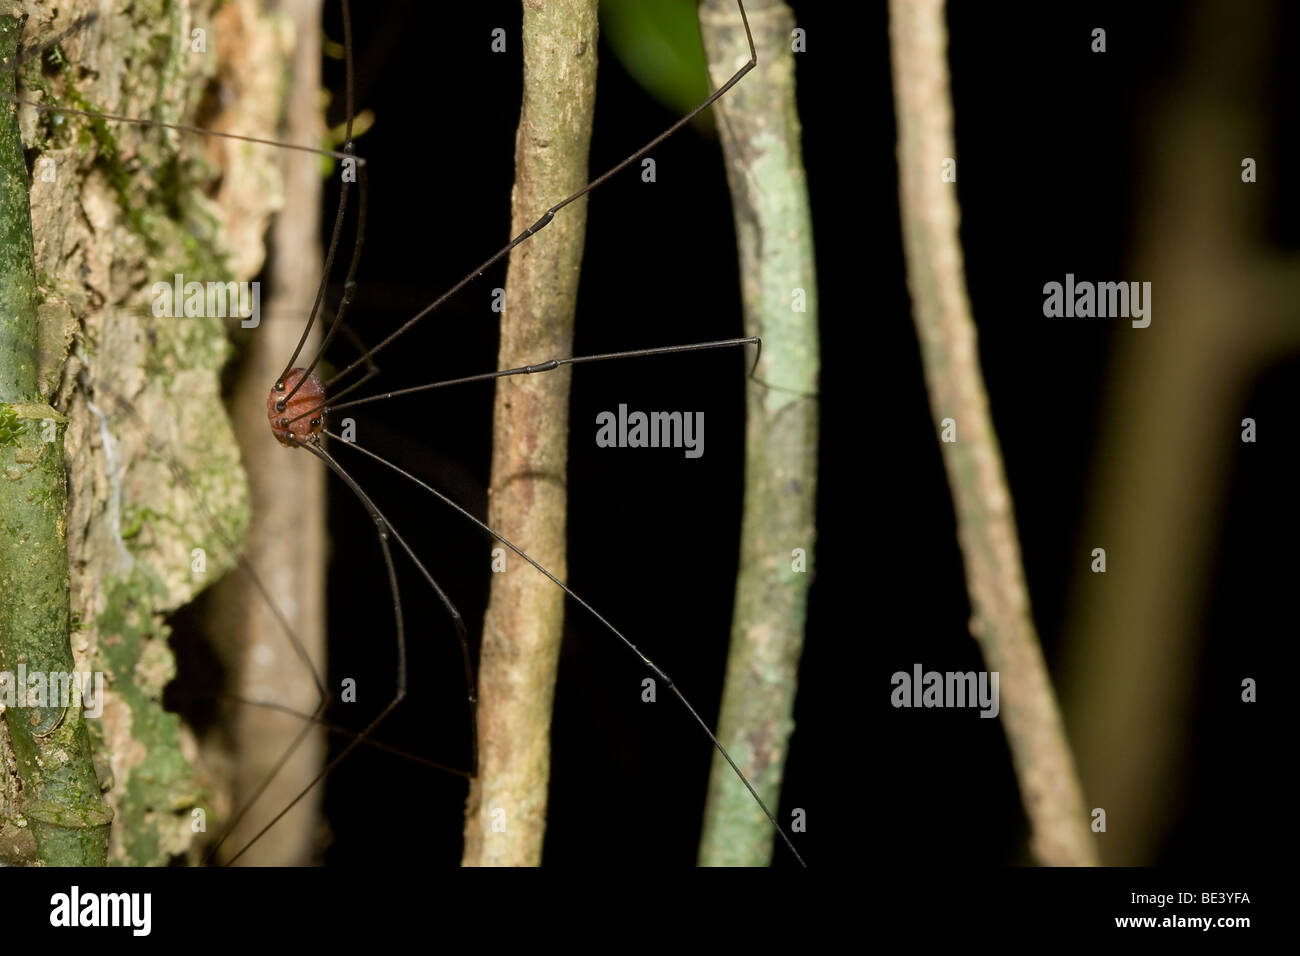 Tropical harvestman, order Opiliones. Photographed in Costa Rica. Stock Photo